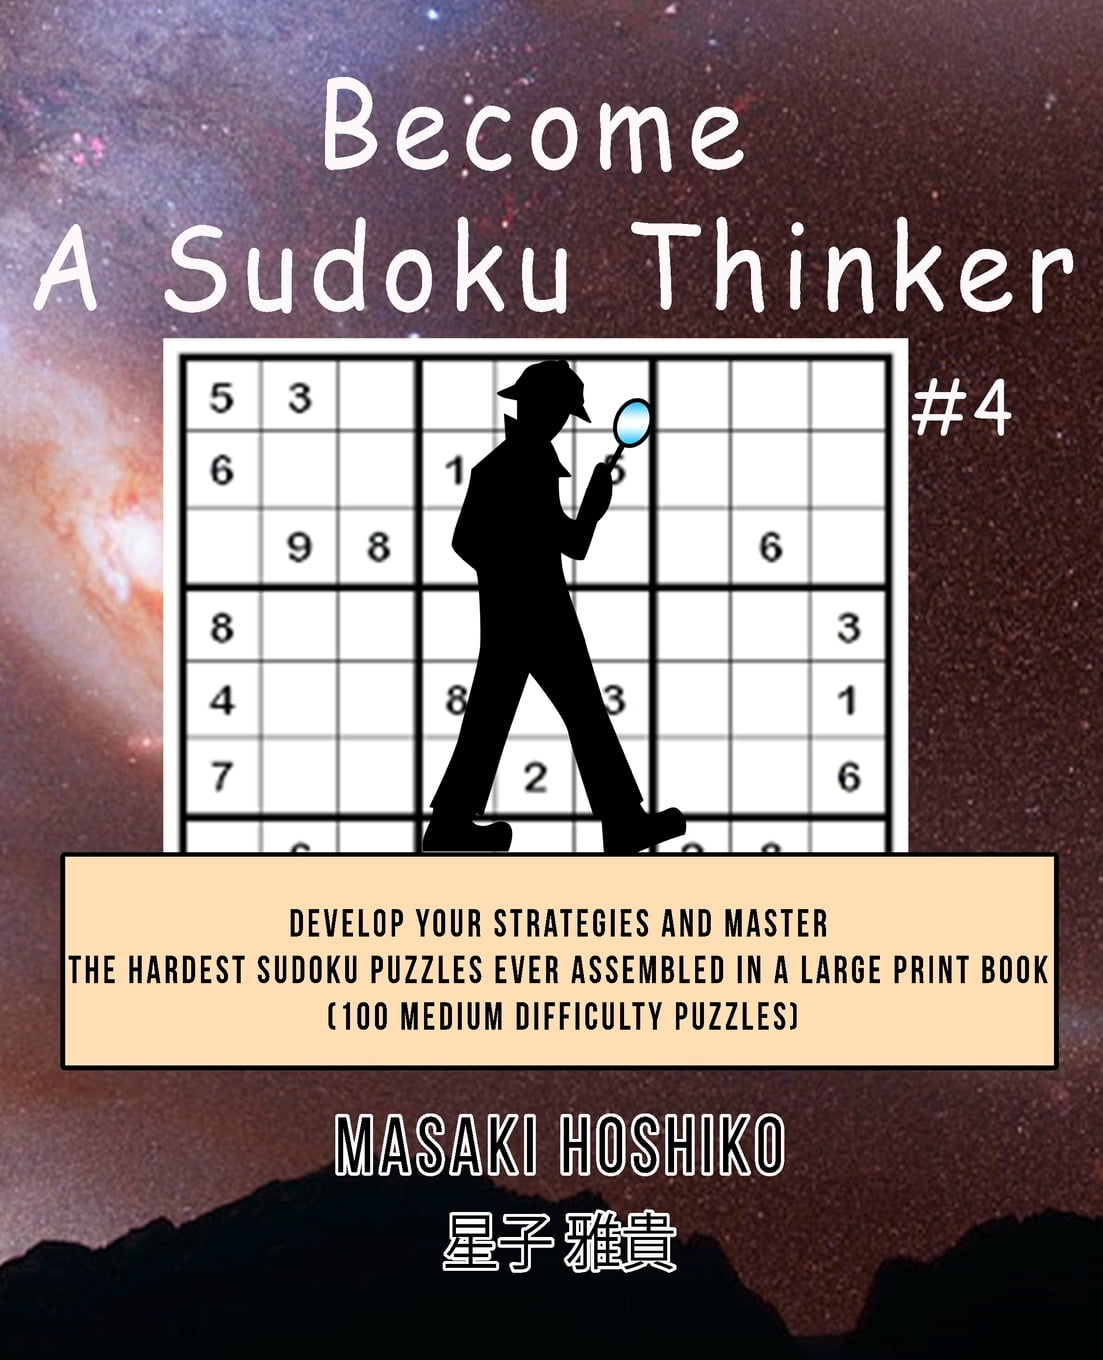 become-a-sudoku-thinker-4-develop-your-strategies-and-master-the